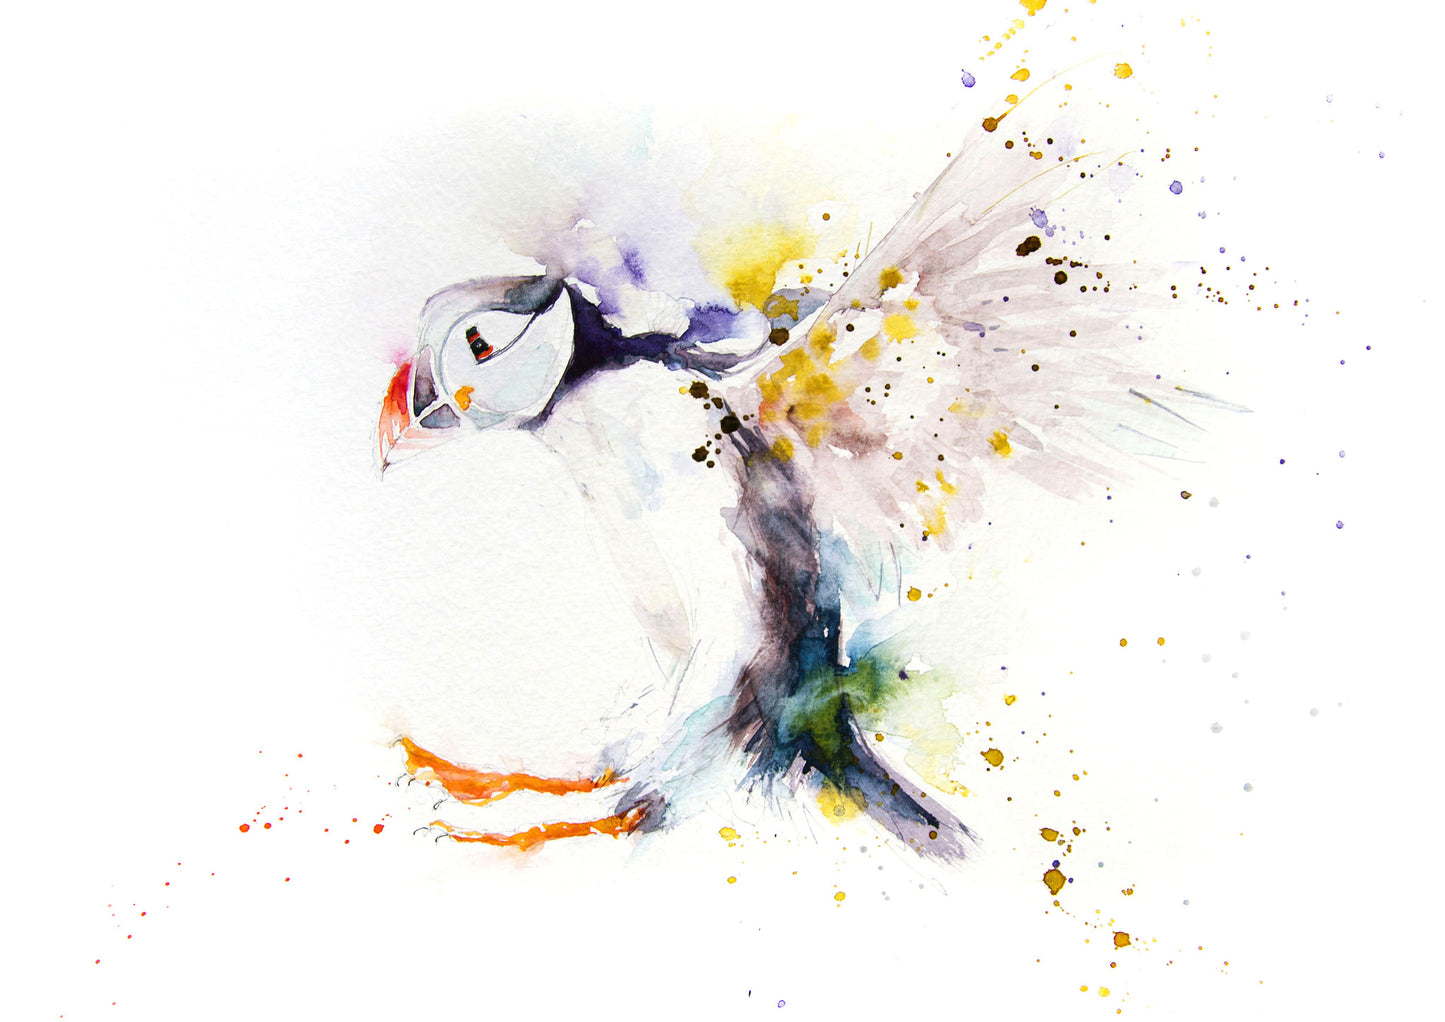 Signed LIMITED EDITION PRINT of original PUFFIN watercolour    - Jen Buckley Art limited edition animal art prints